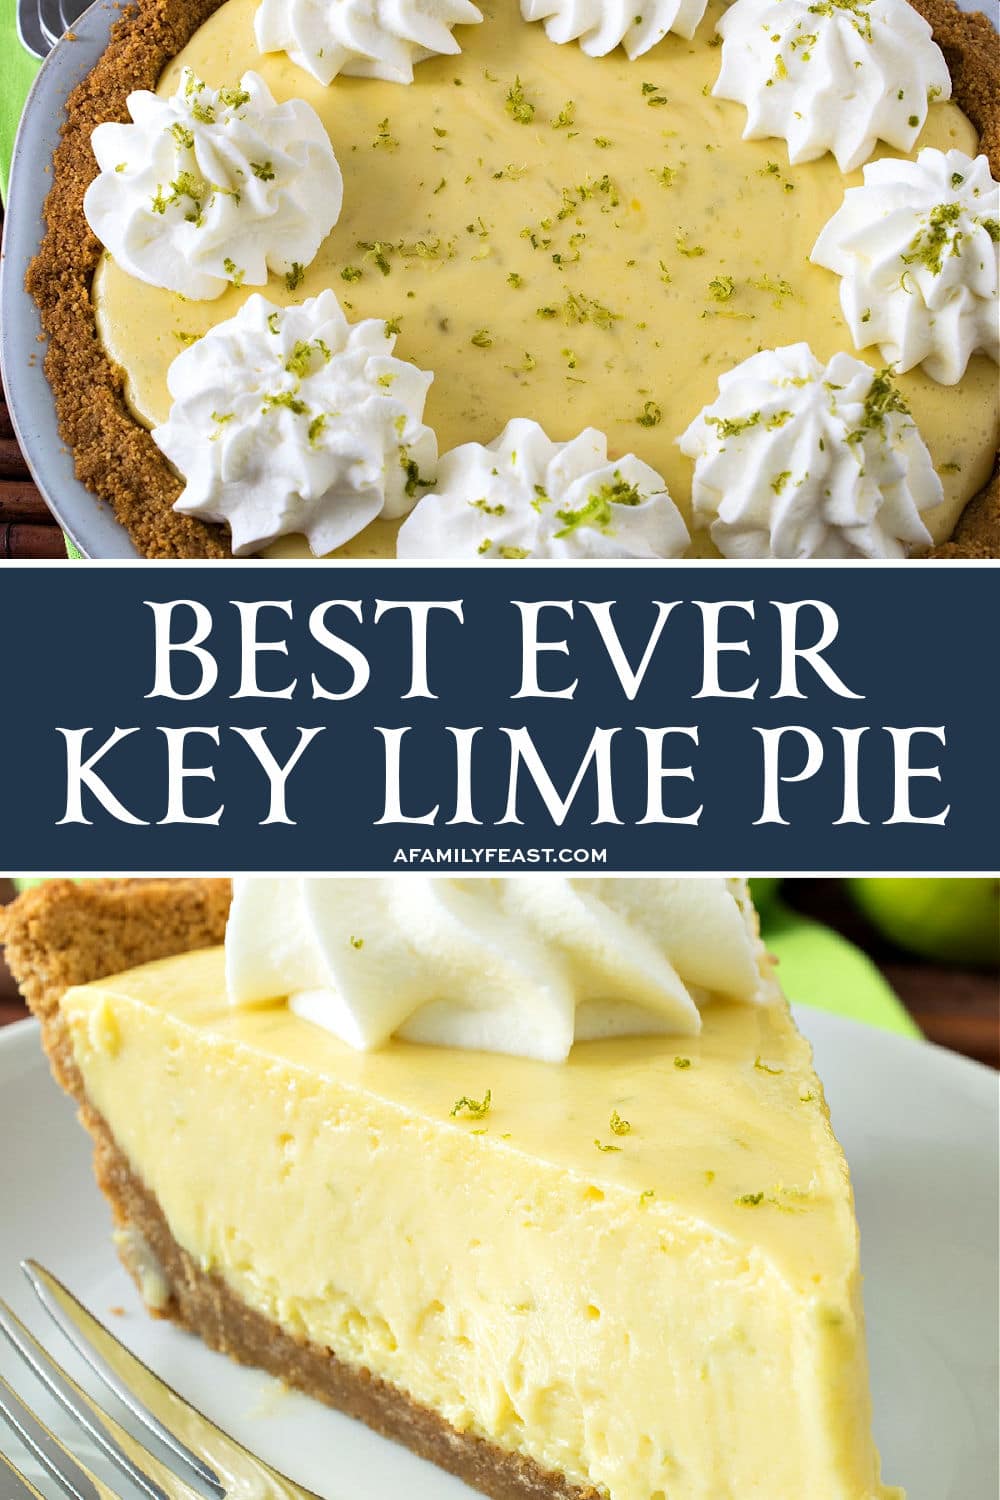 Best Ever Key Lime Pie